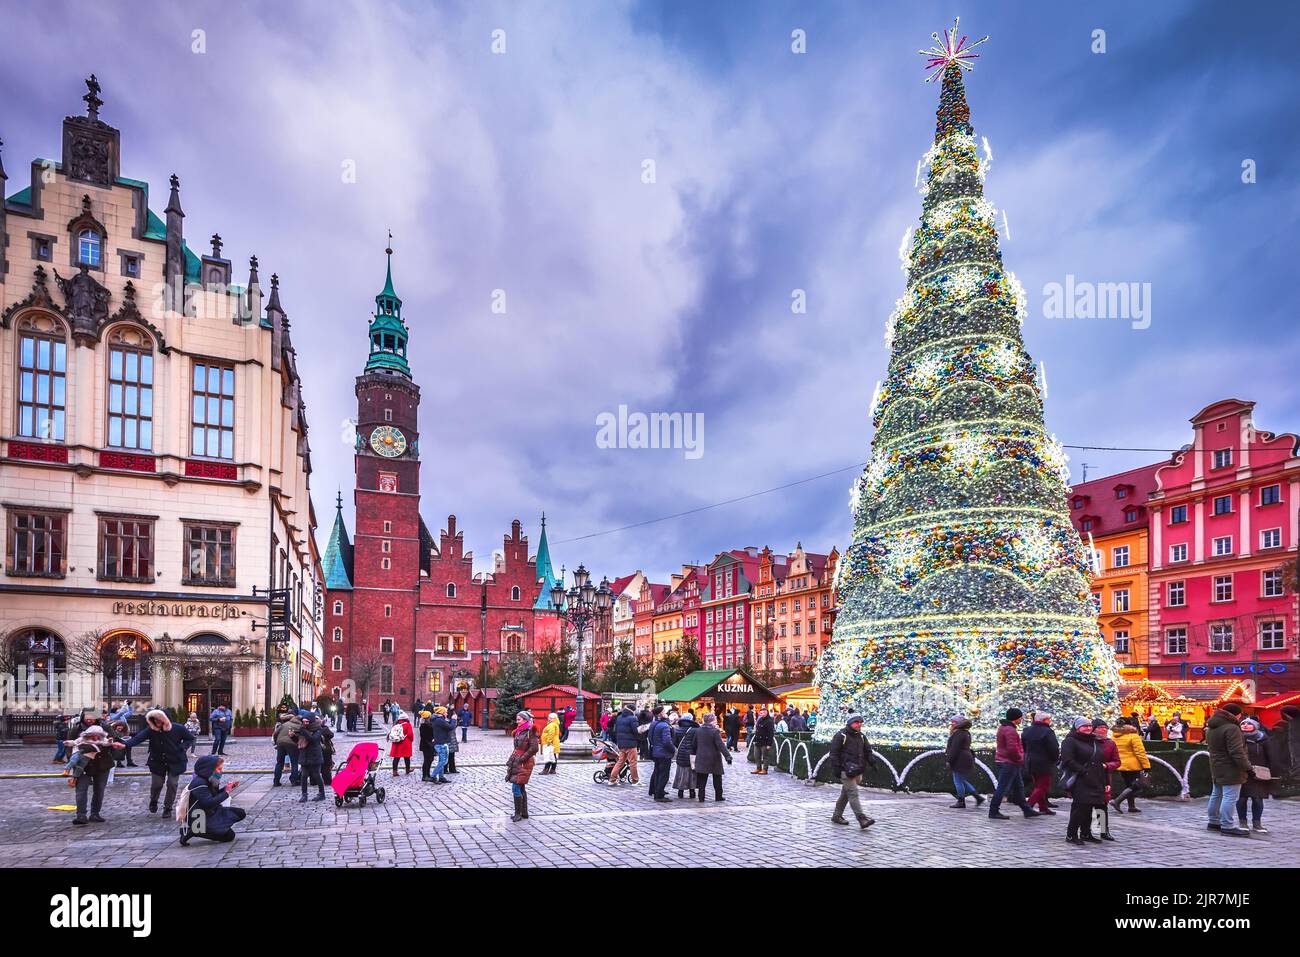 Wroclaw, Poland - December 2019: Famous Christmas Market of Europe, winter travel background. Stock Photo